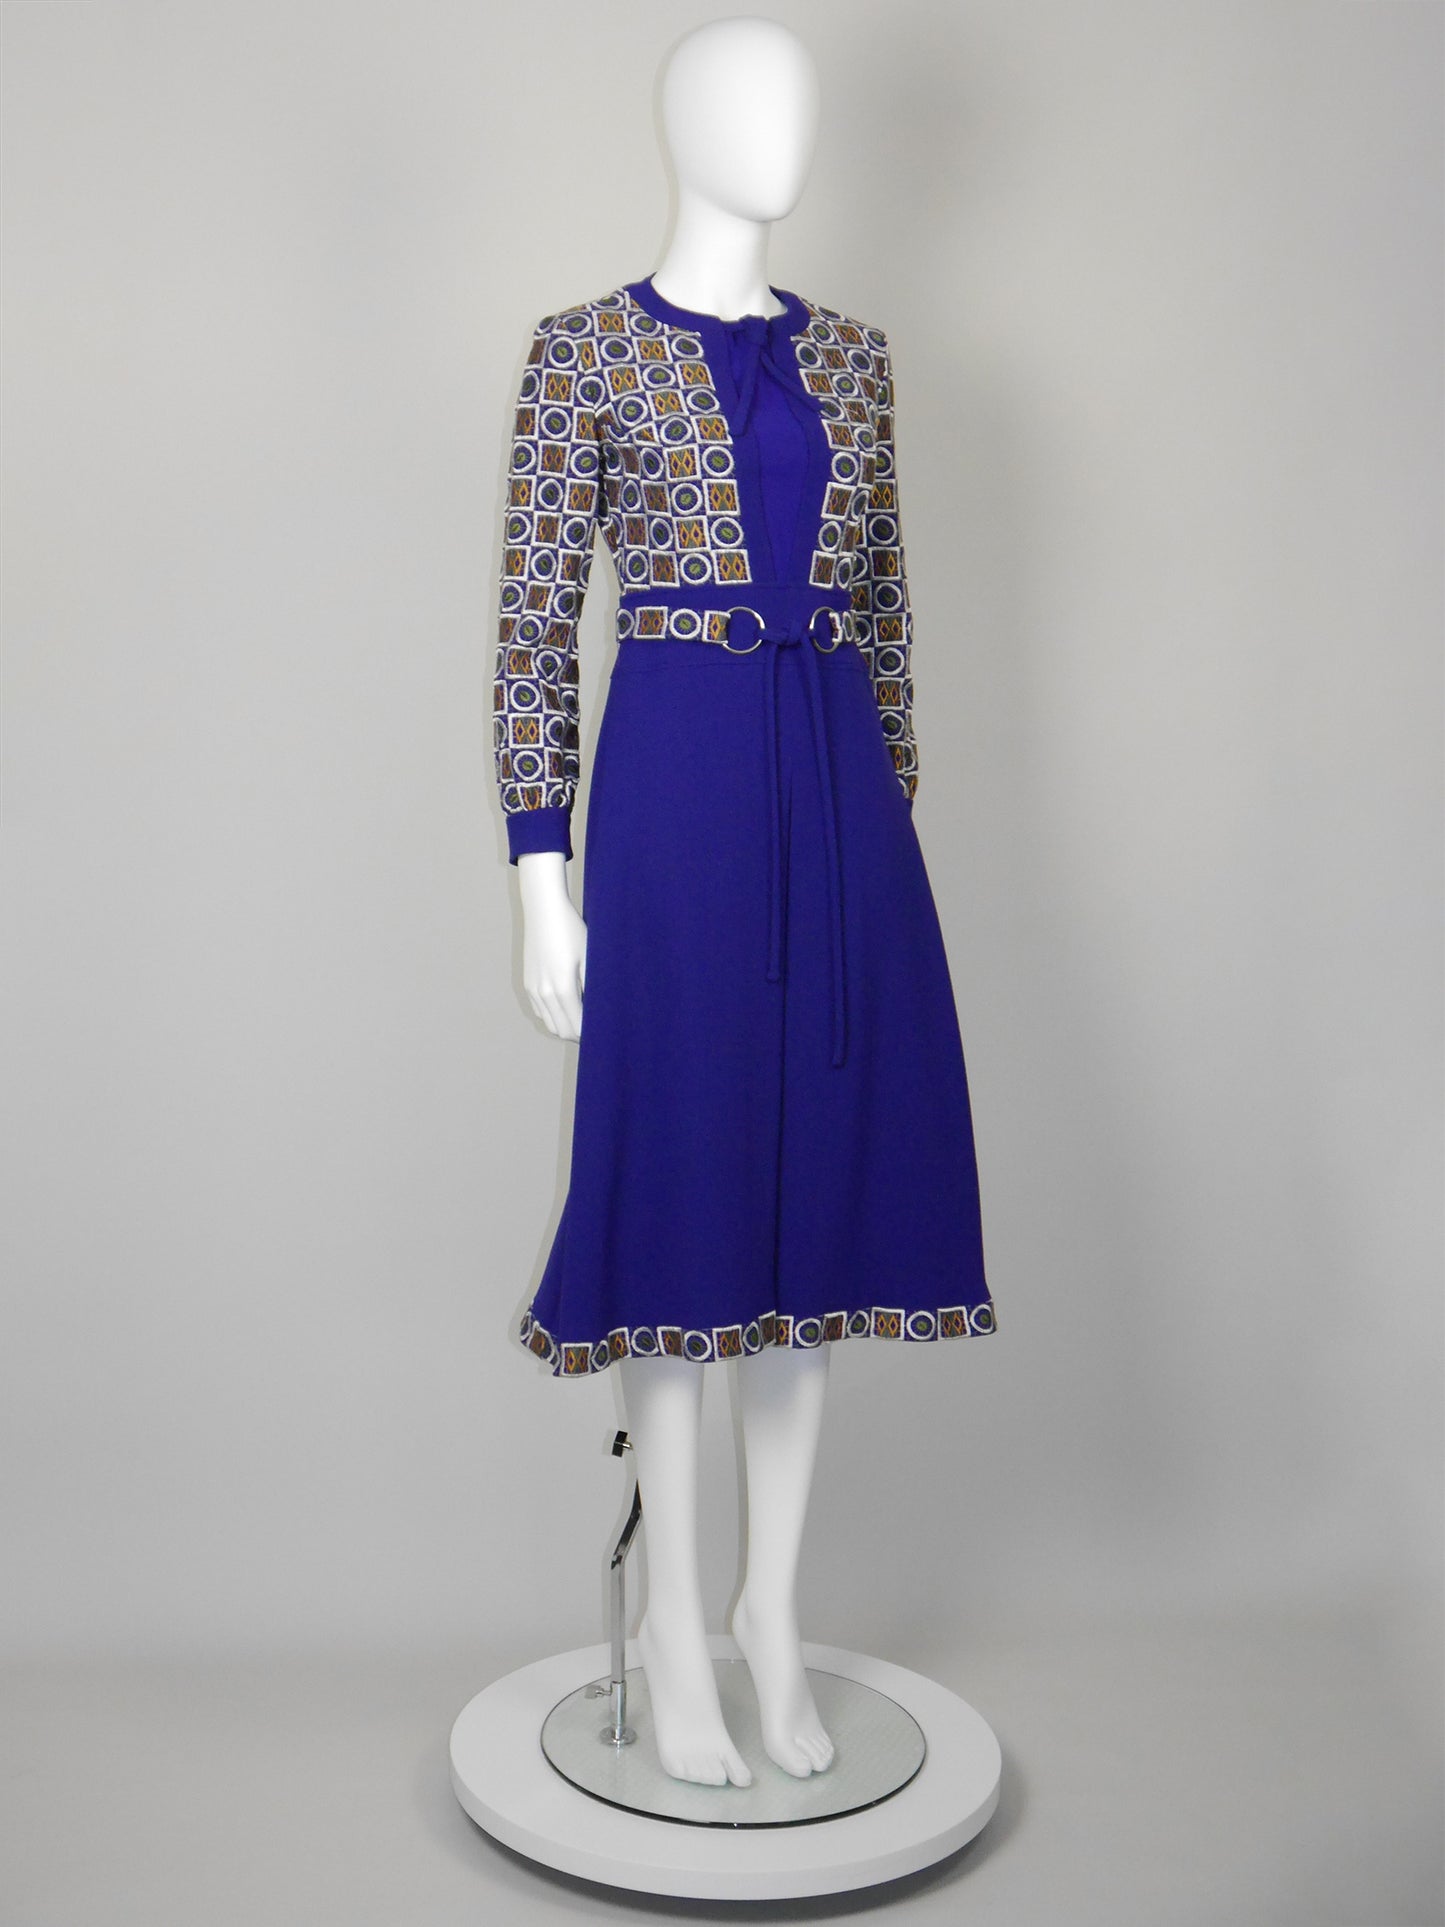 LOUIS FÉRAUD Fall 1969 Vintage Embroidered Space Age Folklore Dress Size XS